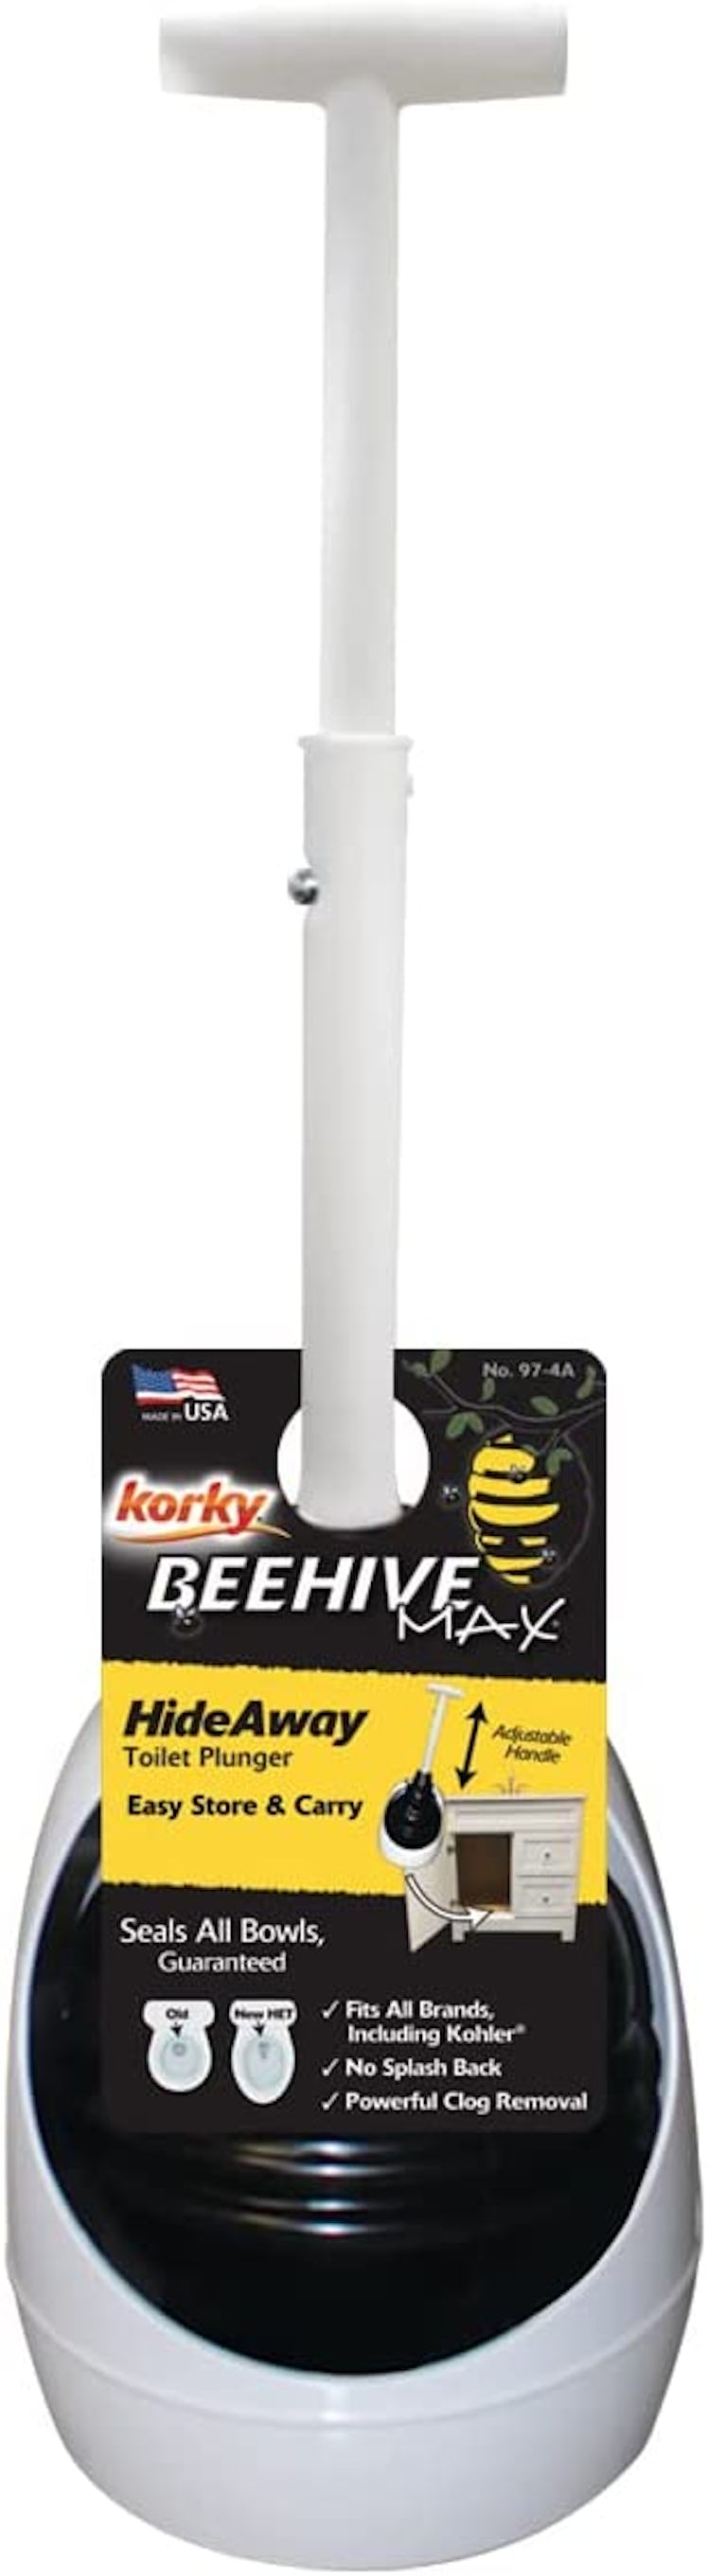 Korky BeehiveMAX Toilet Plunger